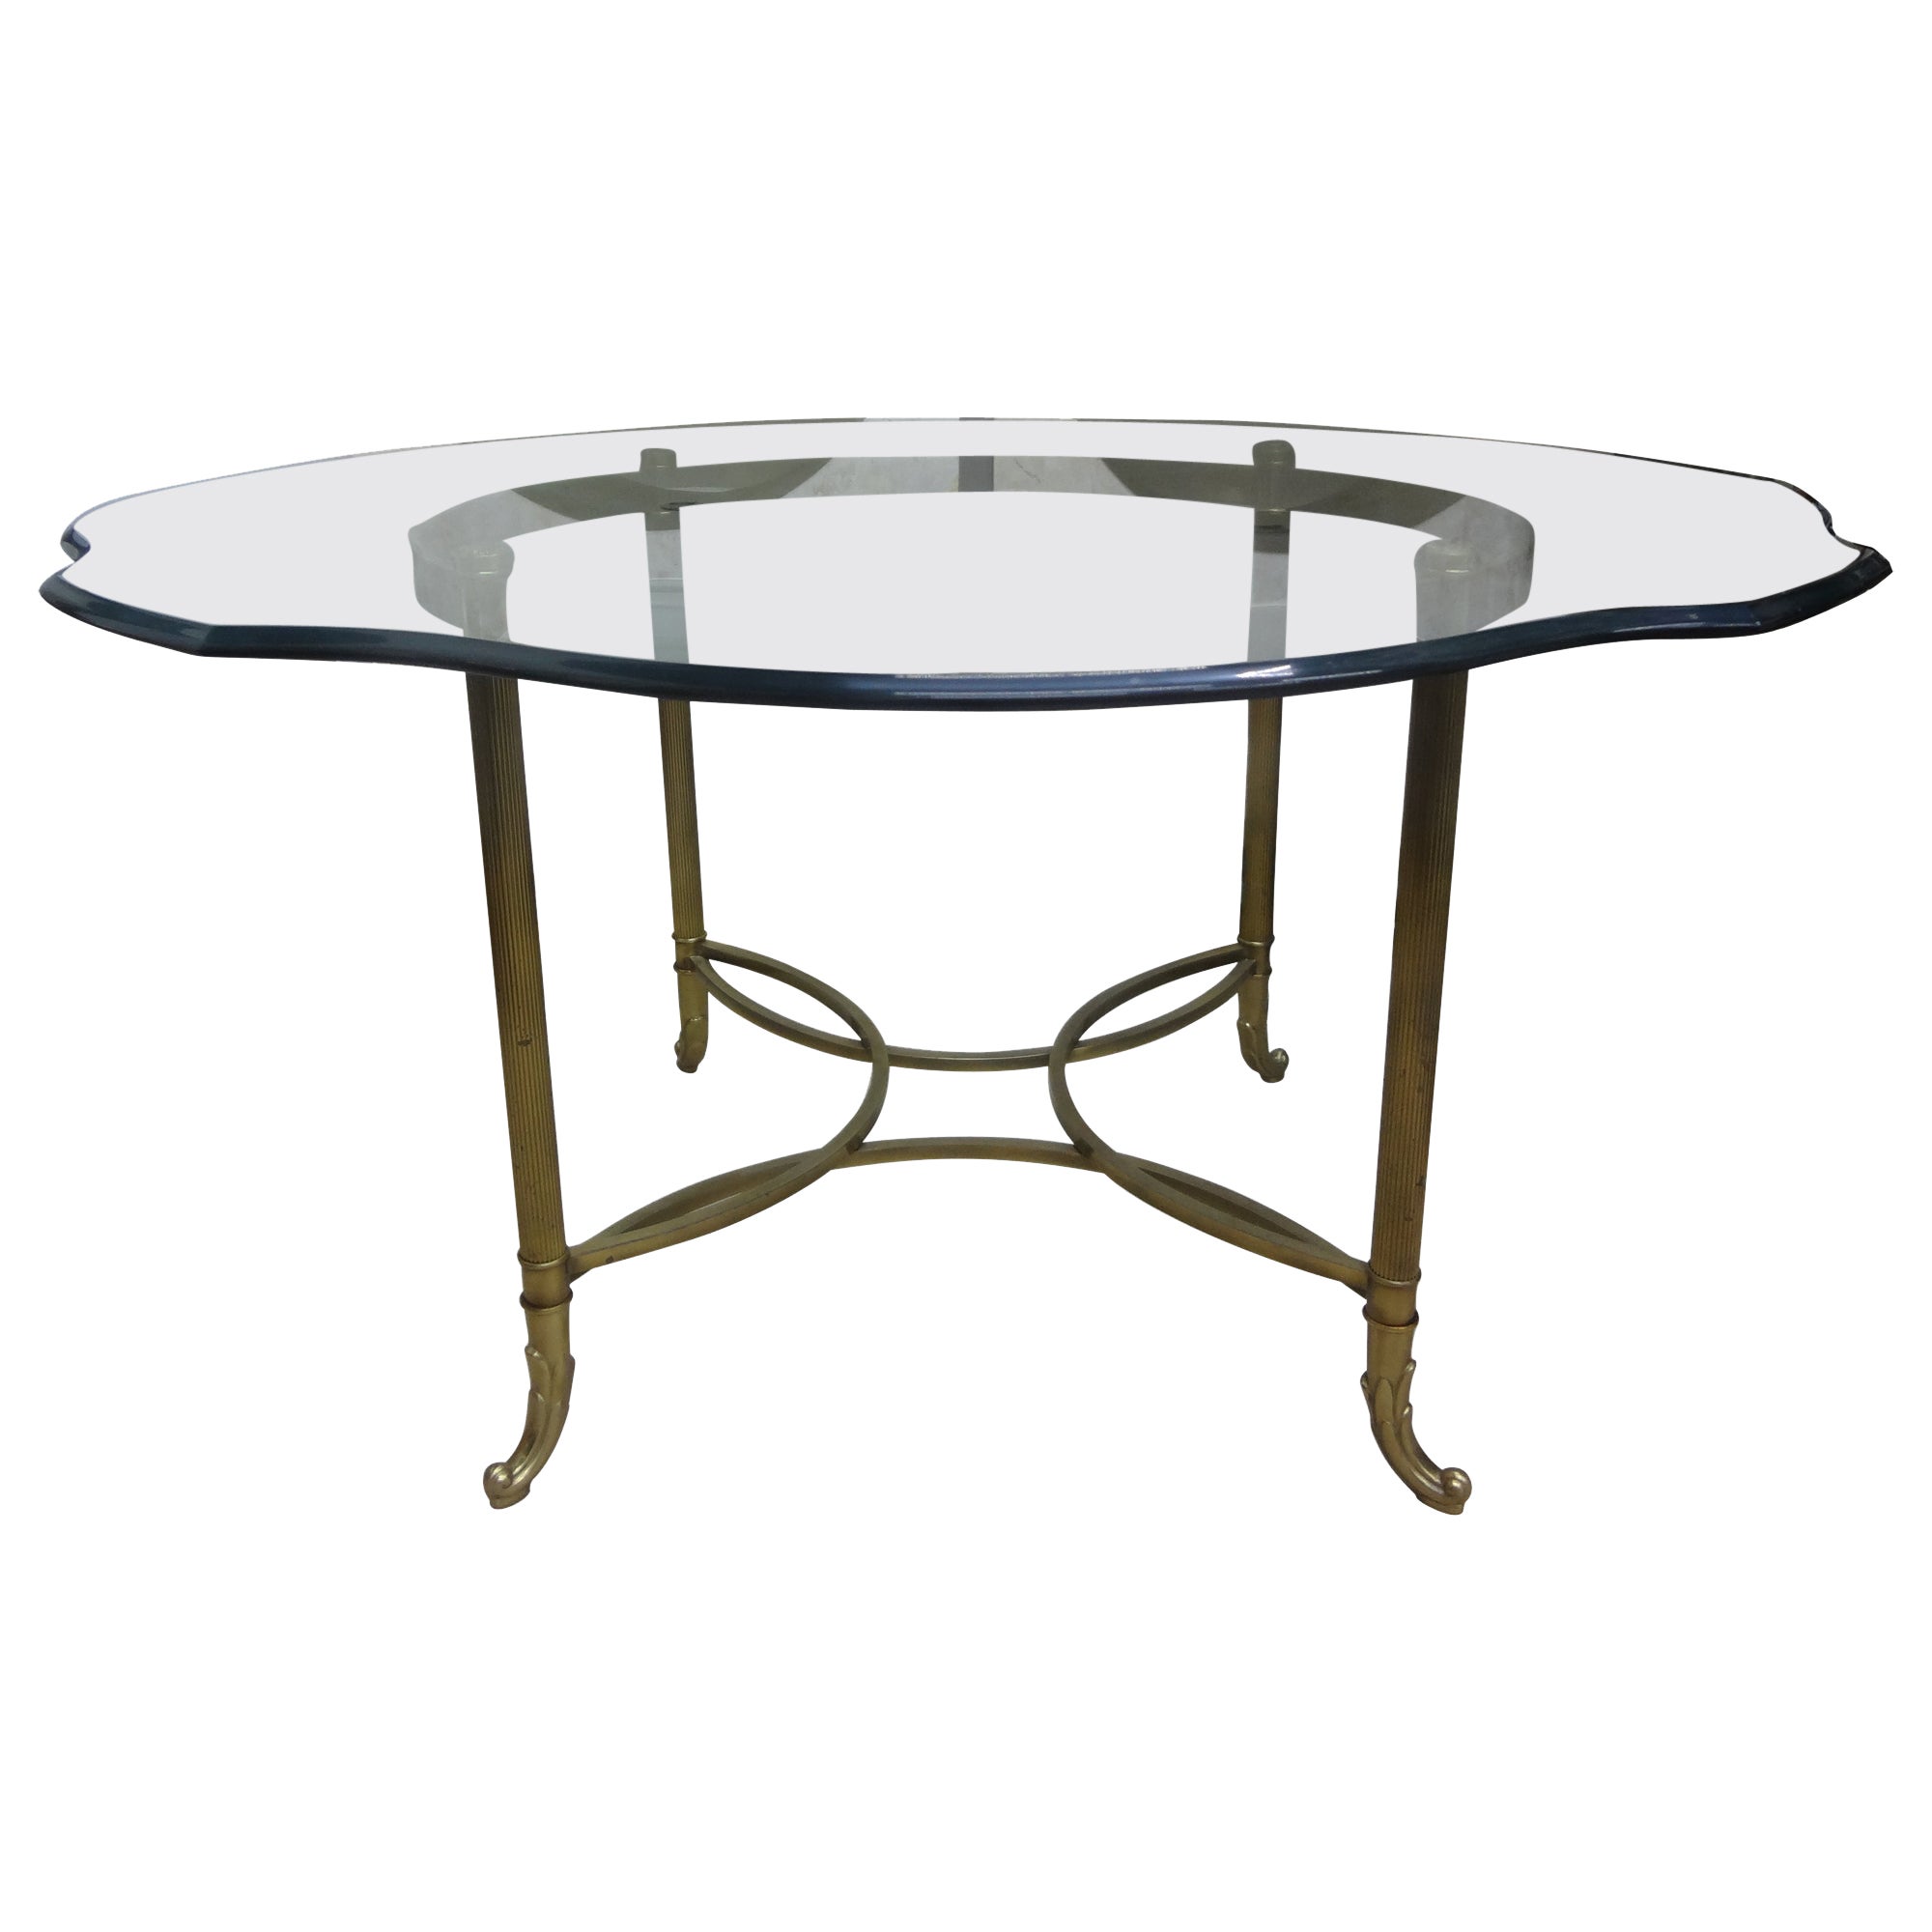 Italian Hollywood Regency Brass Center Table Or Dining Table For Sale